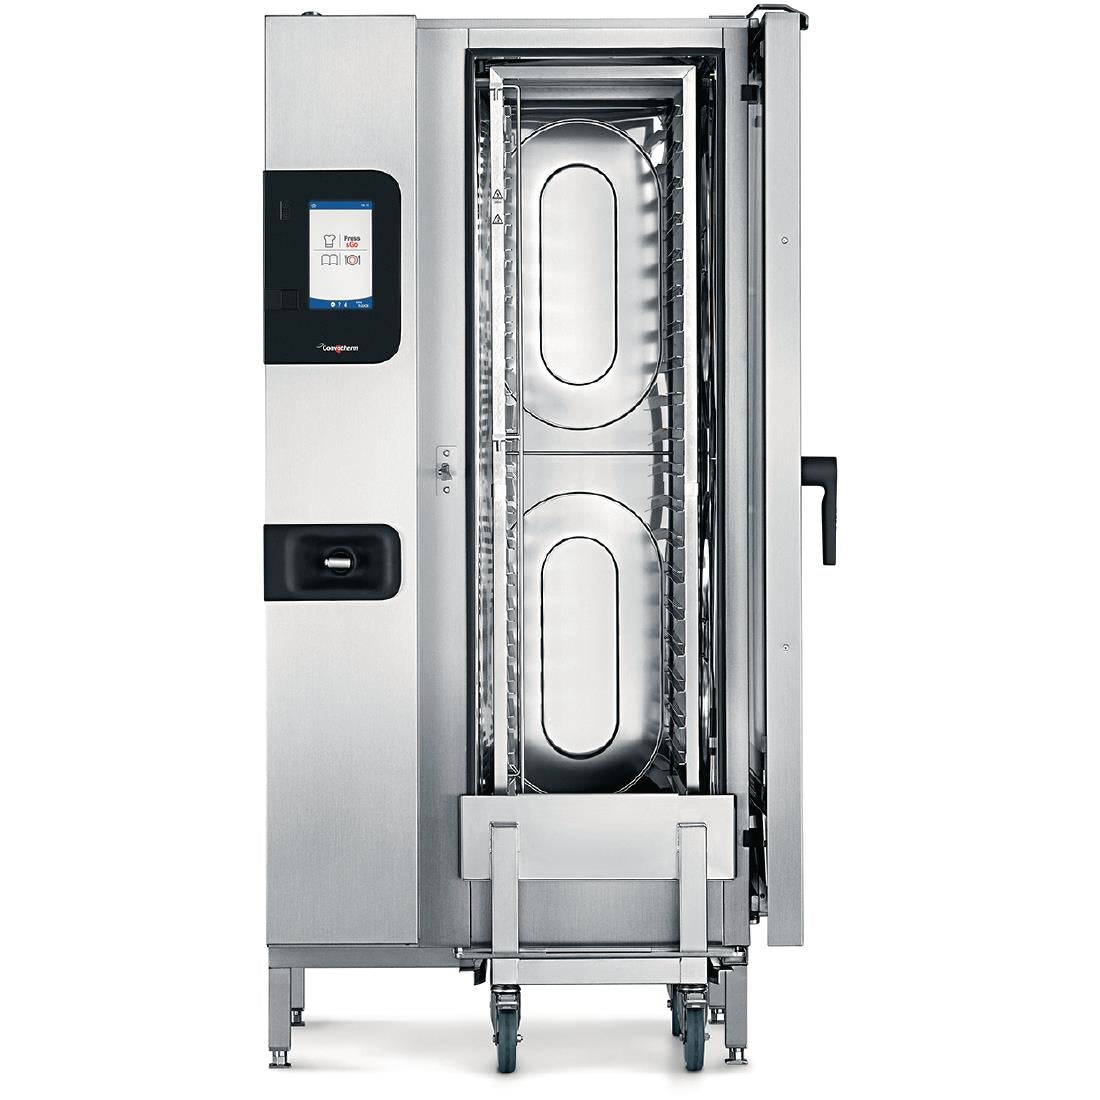 DR436-MO Convotherm 4 easyTouch Combi Oven 20 x 1 x1 GN Grid JD Catering Equipment Solutions Ltd